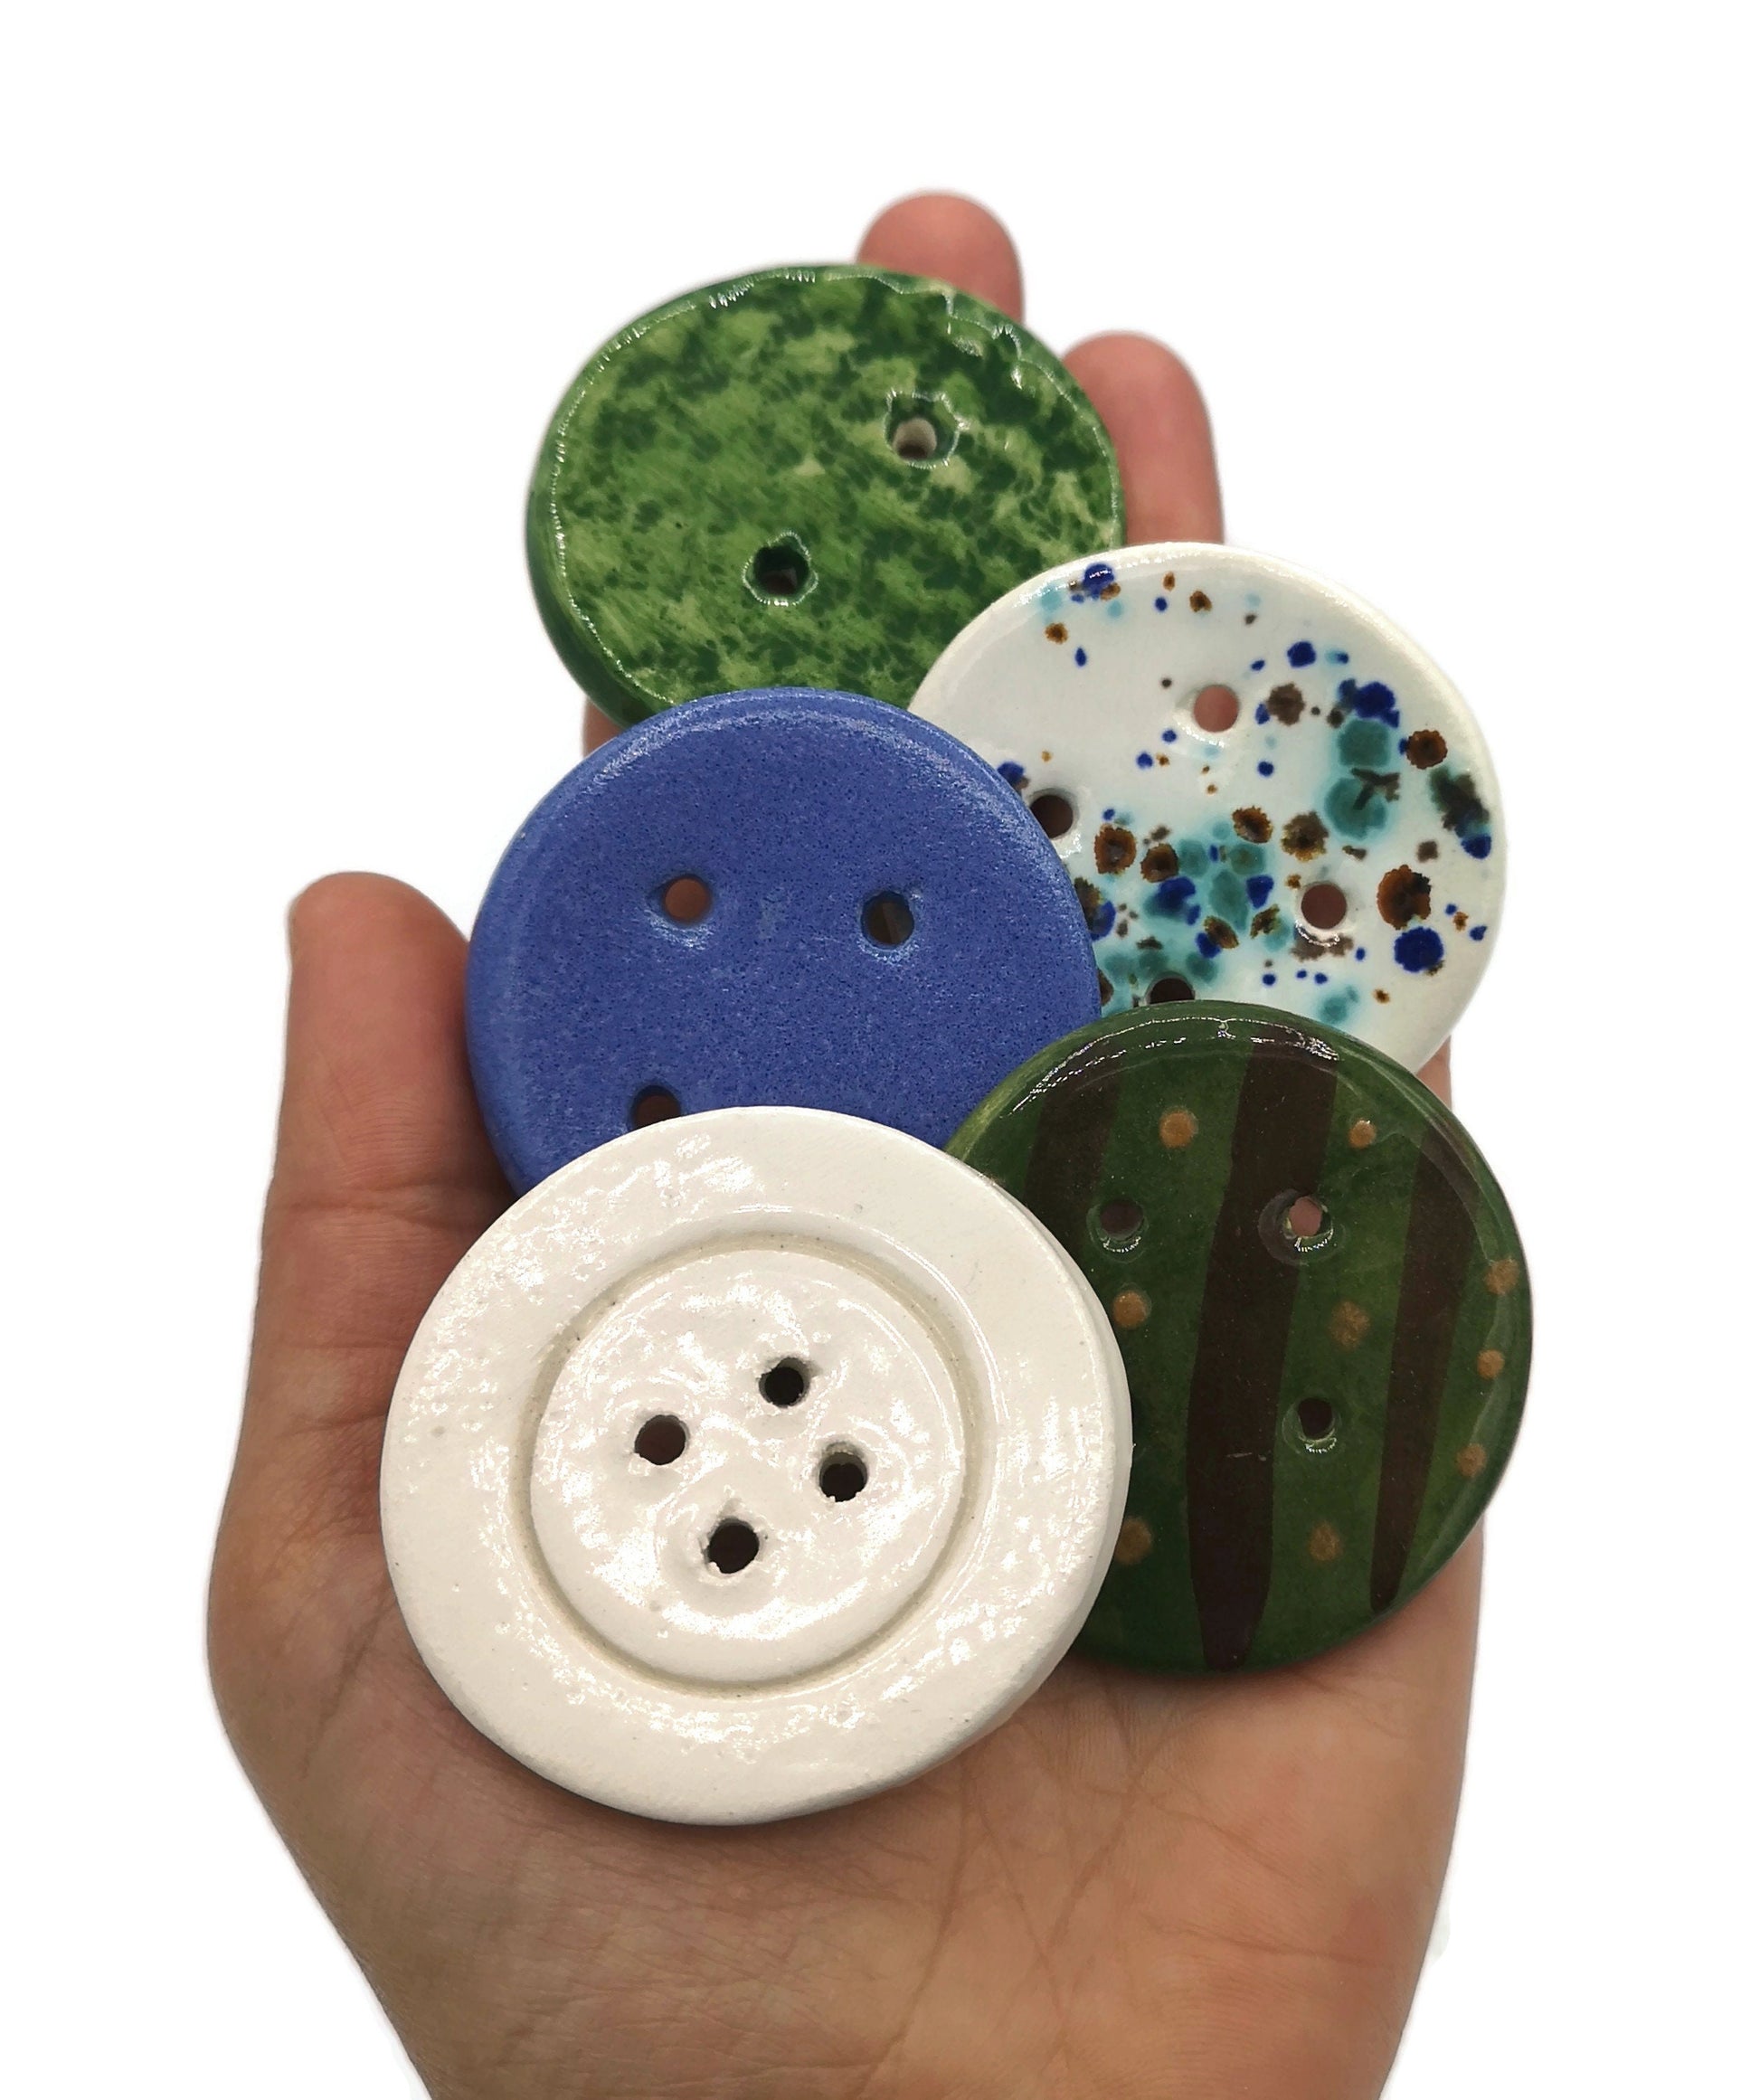 Extra Large Buttons, 5 Pcs Clay Buttons Strange And Unusual, Sewing Supplies And Notions, Best Sellers Handmade Ceramic Sewing Buttons Lot - Ceramica Ana Rafael